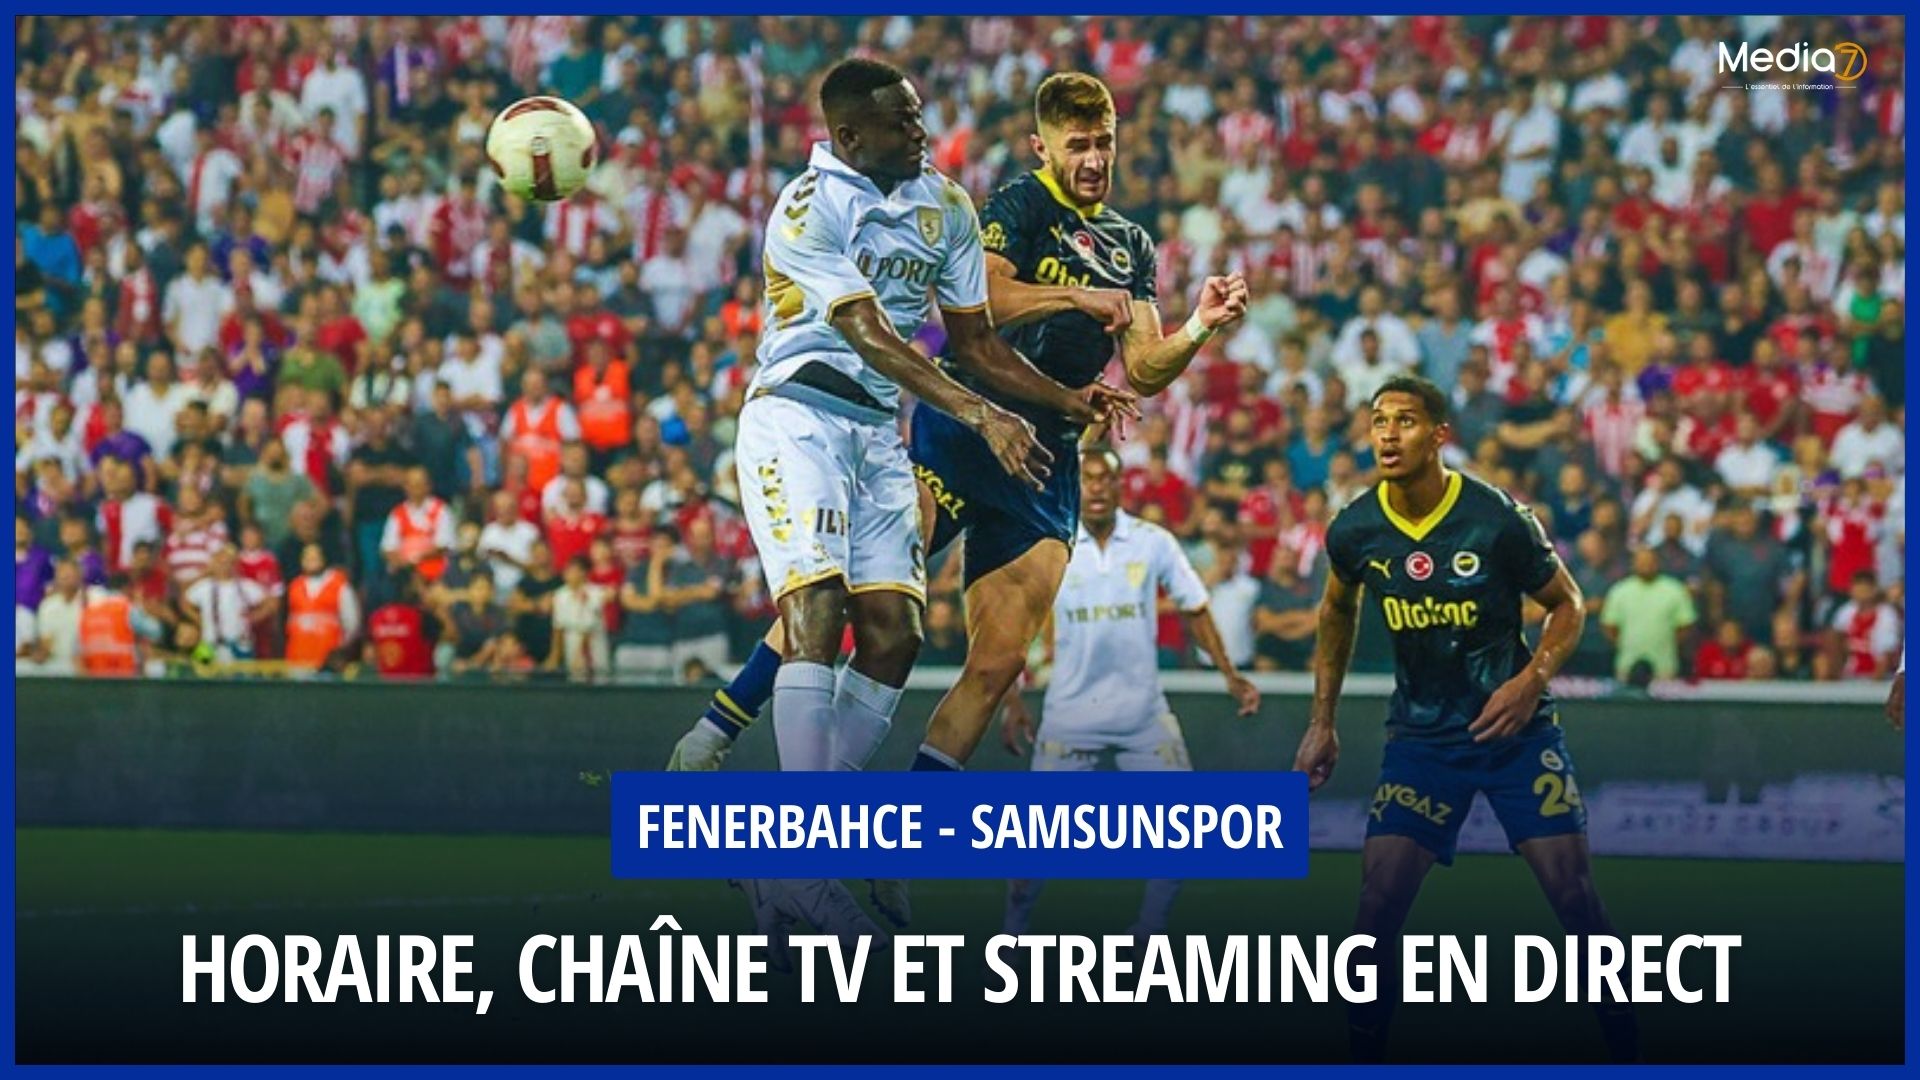 Live Stream: Fenerbahce - Samsunspor - Where to Watch and What Time? - Media7